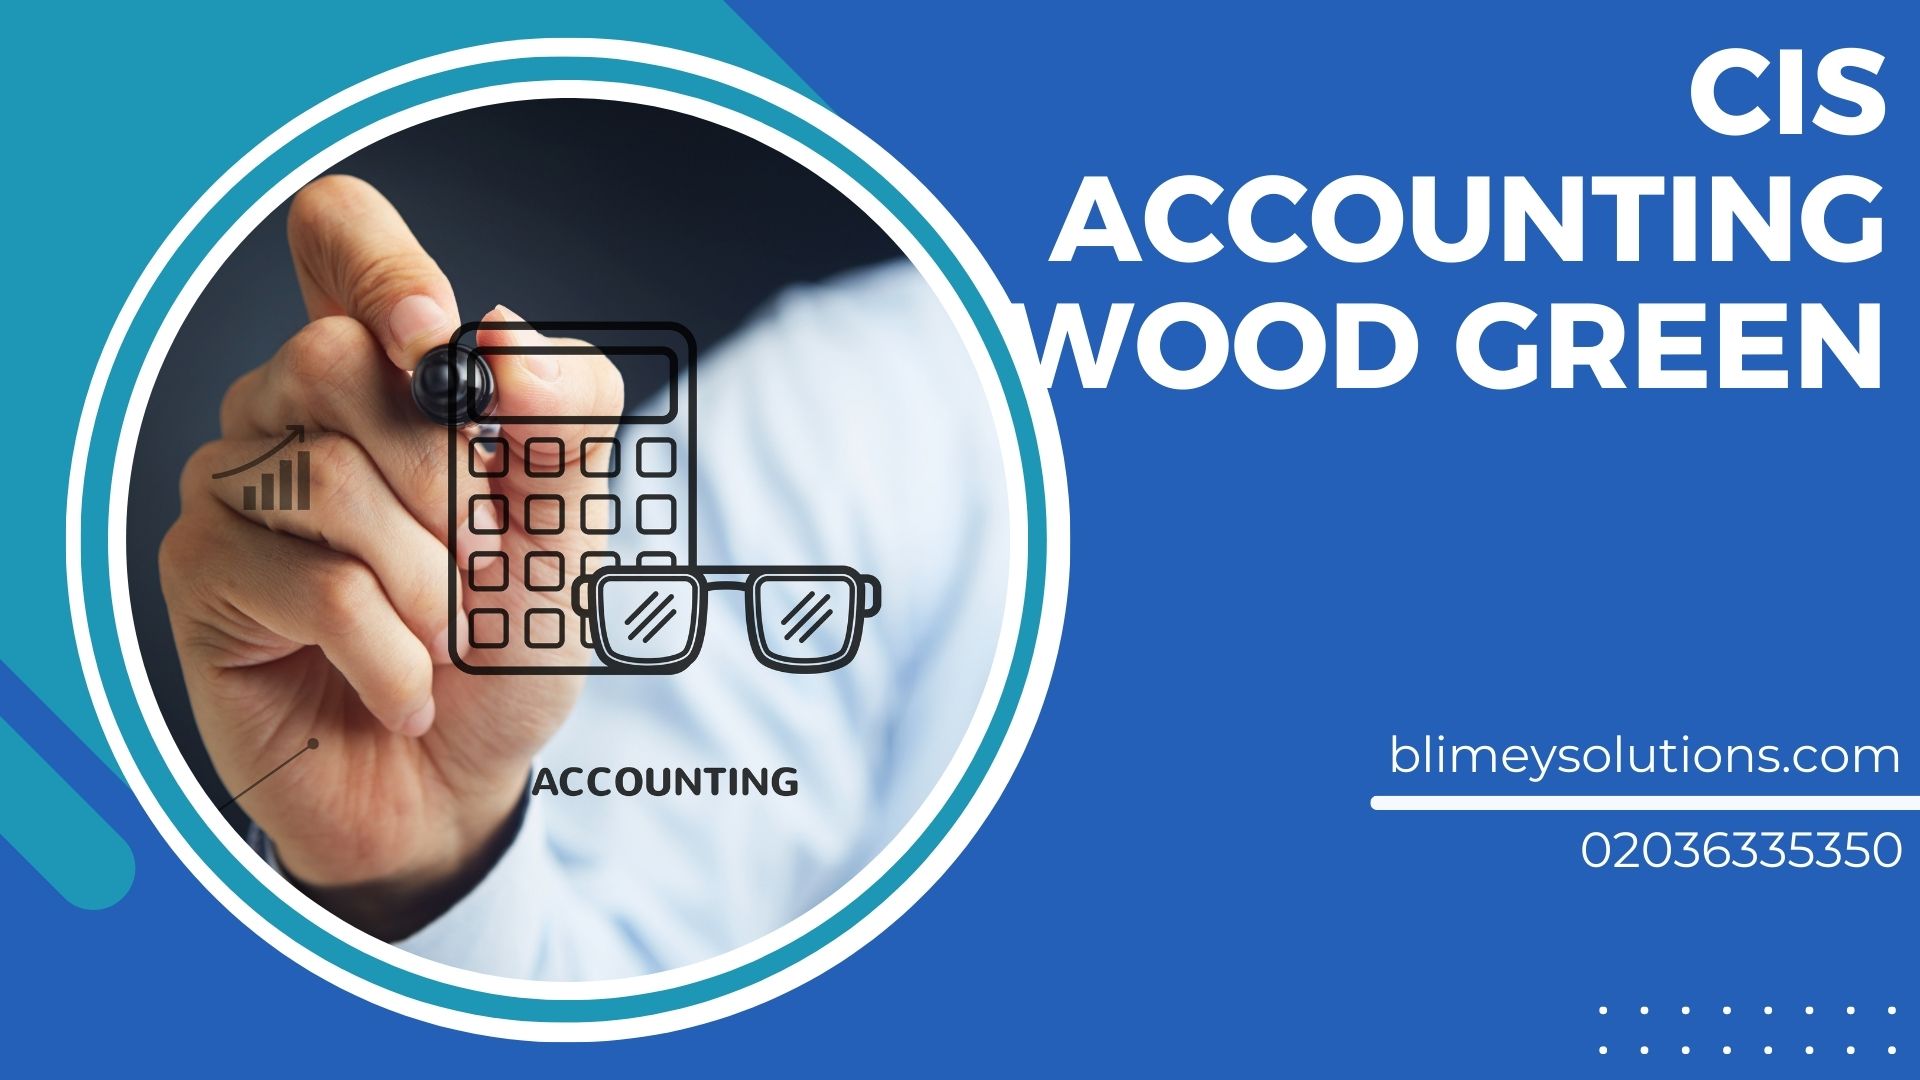 Cis Accounting In Wood Green N22 London